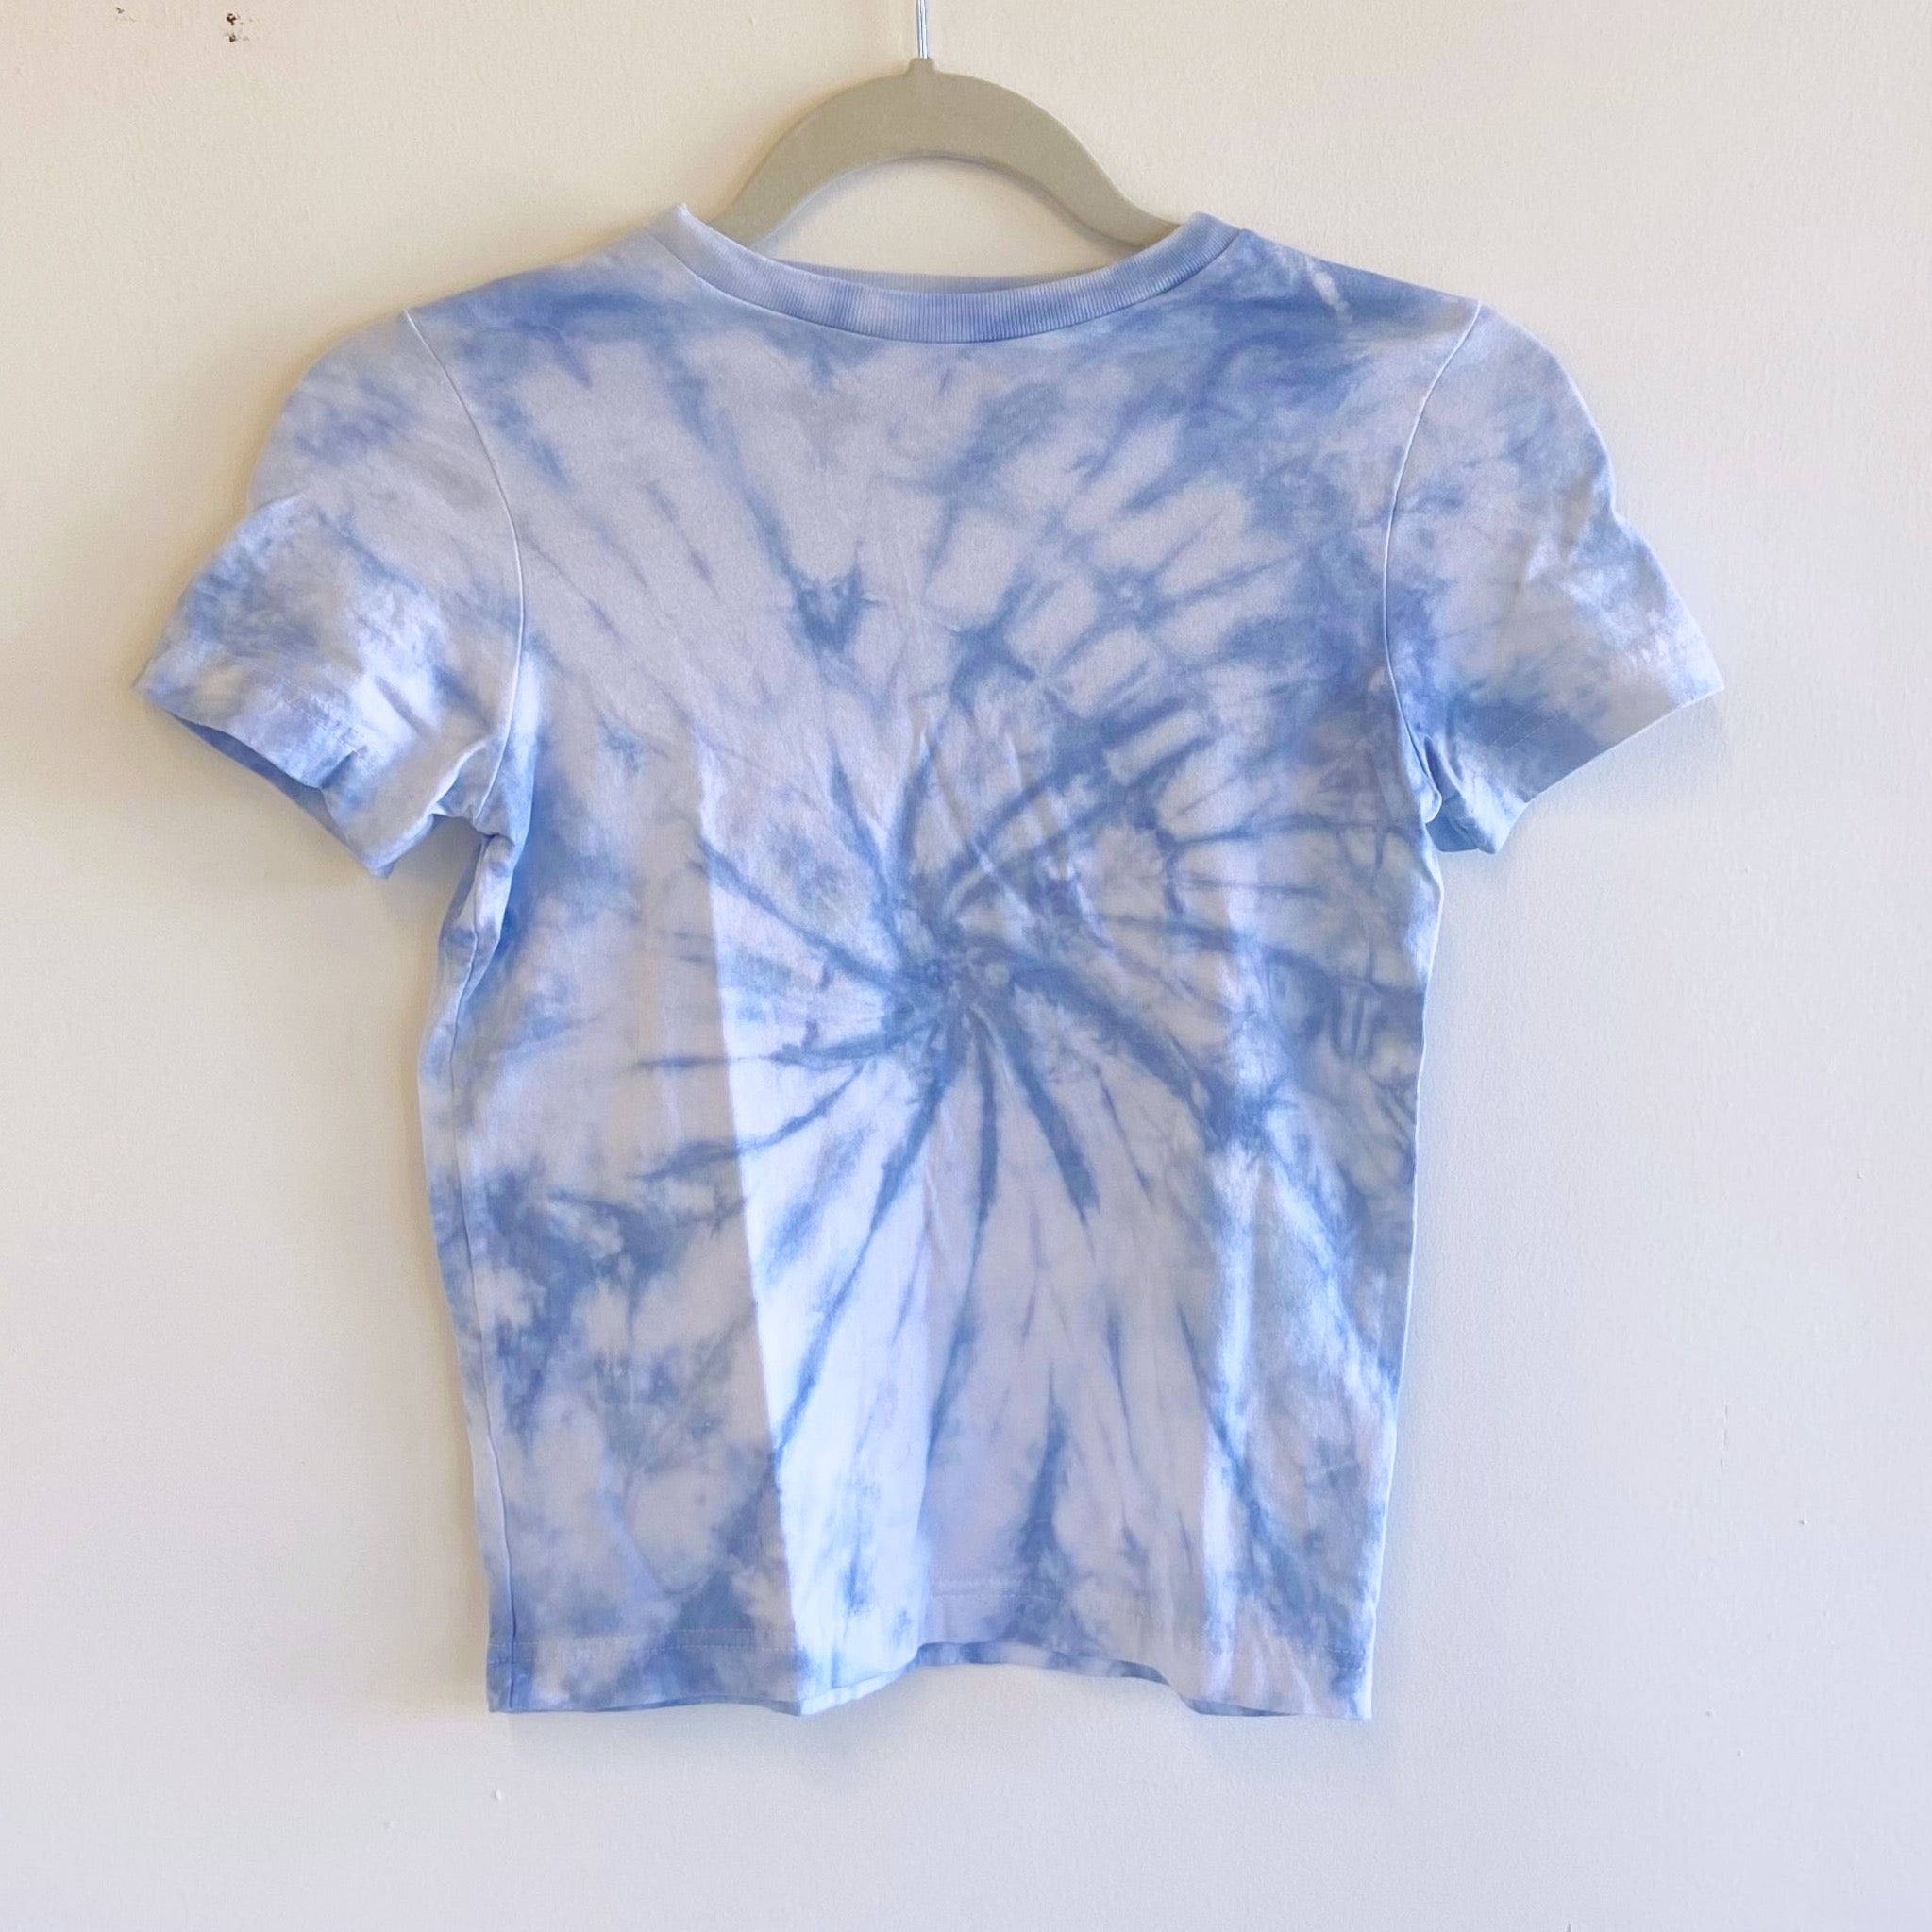 Kids' Tie Dyed and Embroidered Tee